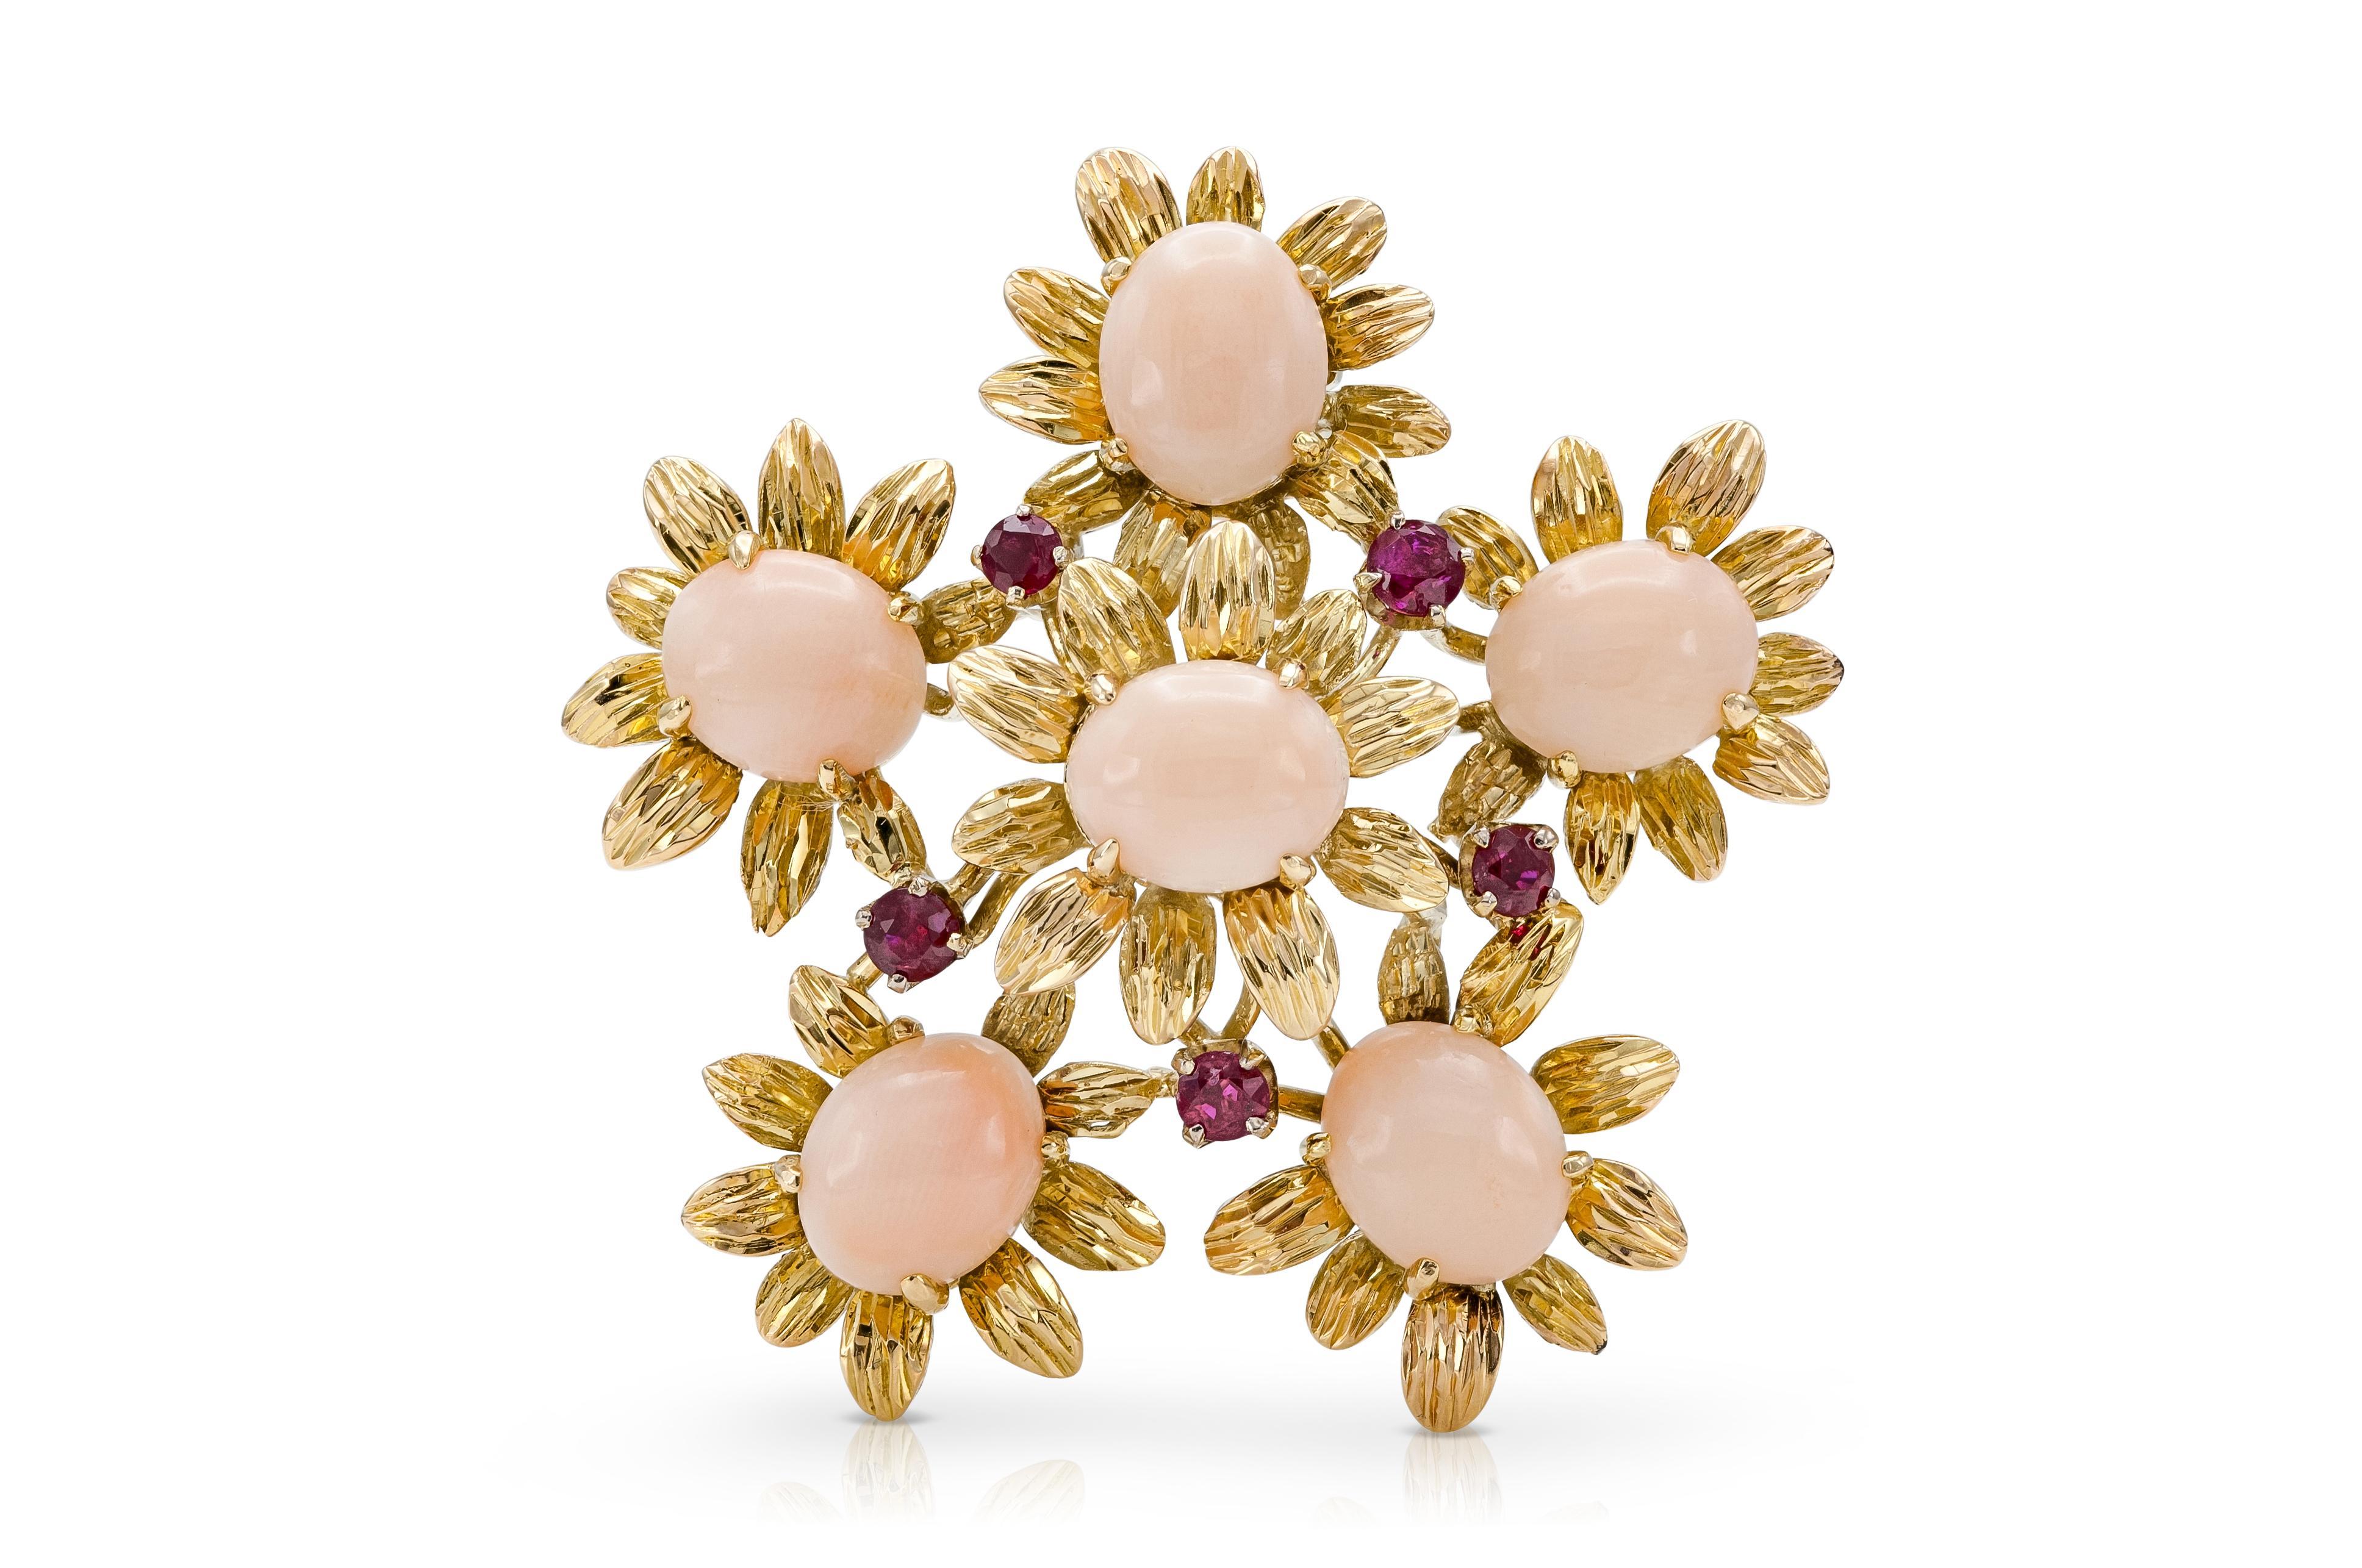 Finely crafted in 18k yellow gold with Pink Coral and Round cut Rubies.
Circa 1960s